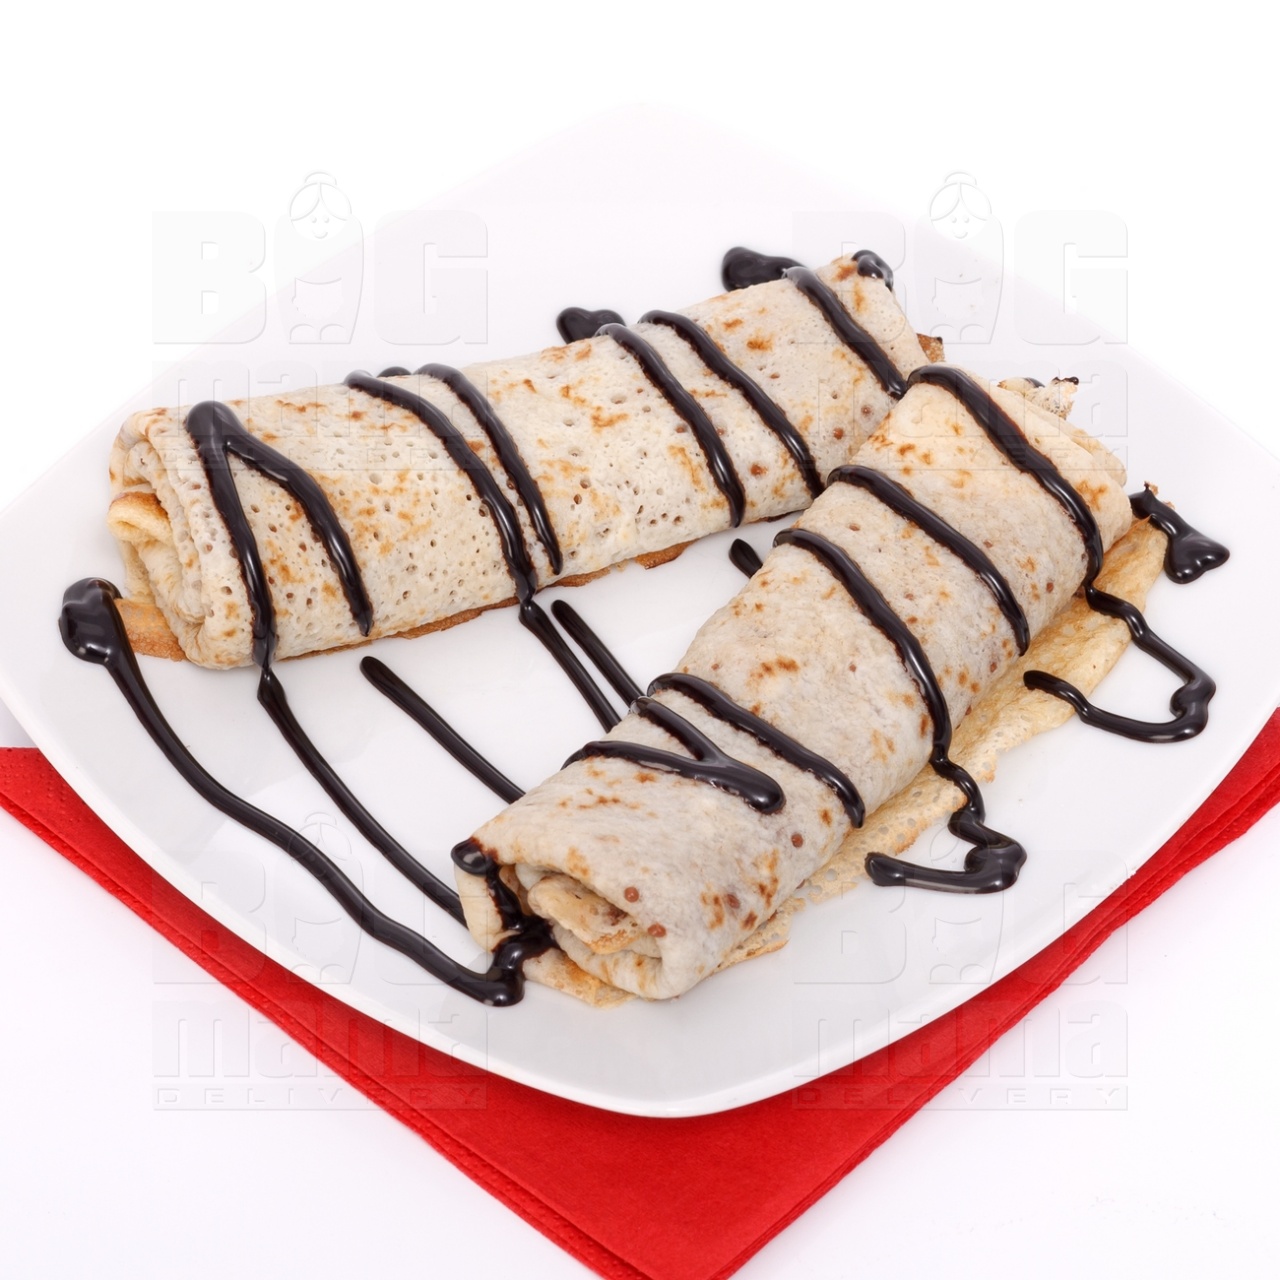 Product #79 image - Pancakes with chocolate